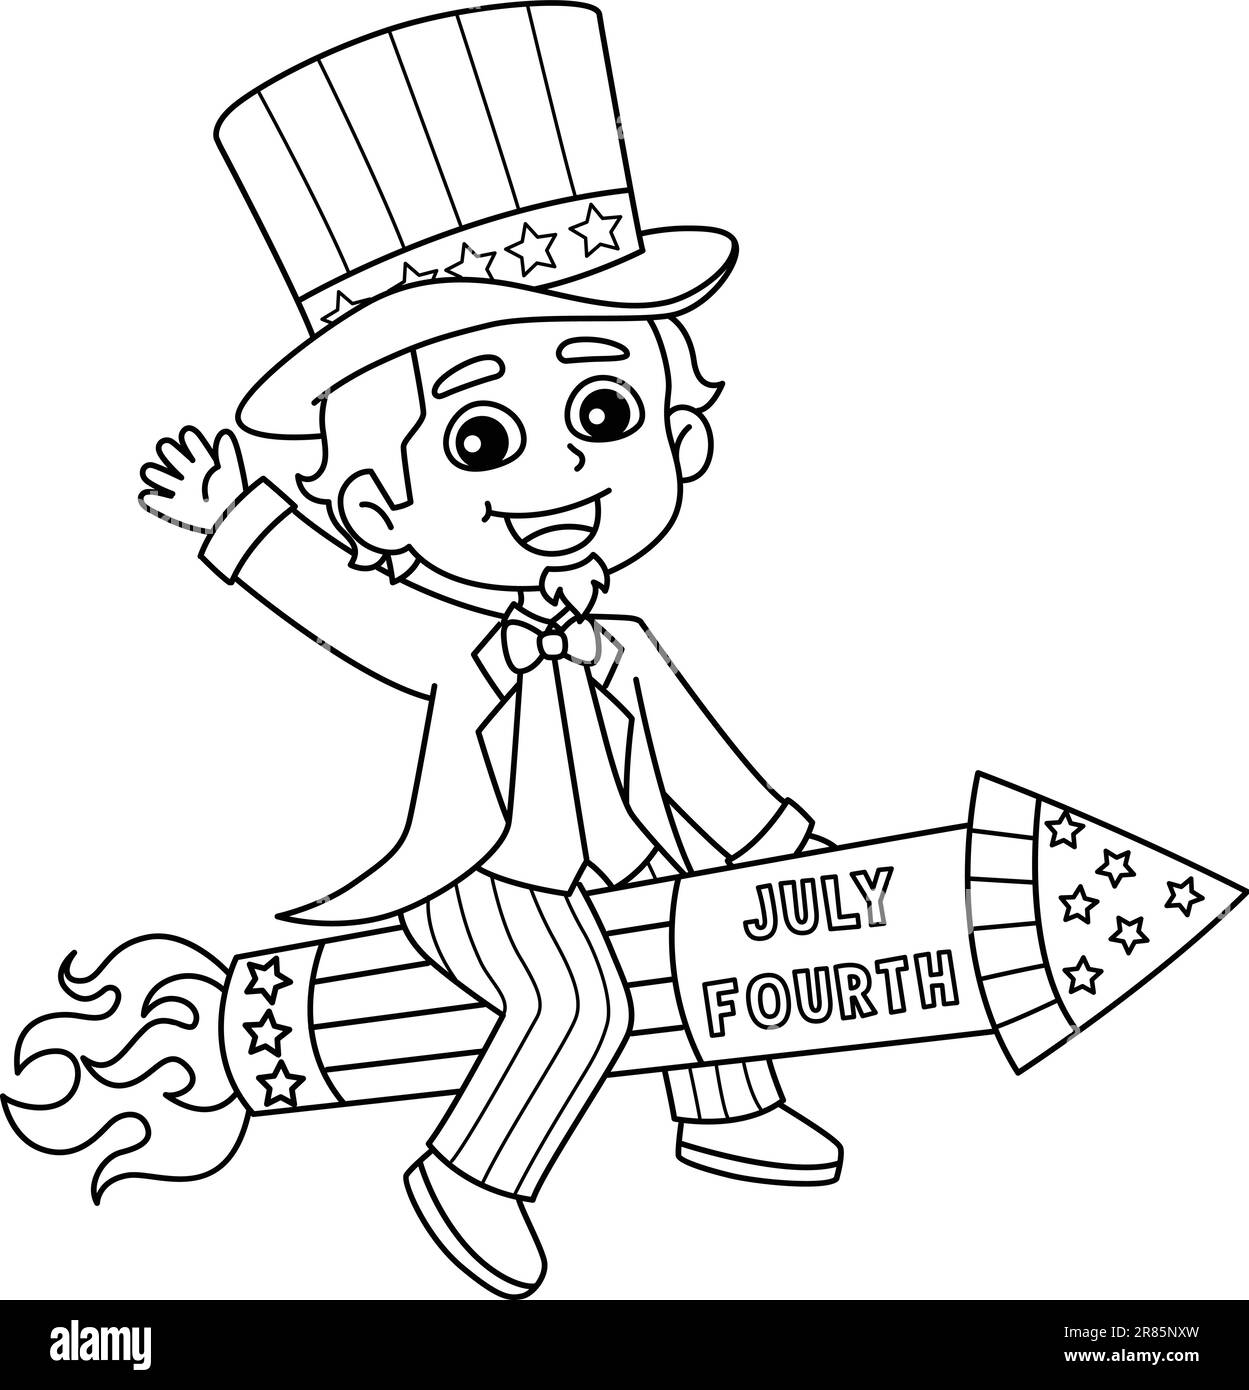 Th of july uncle sam isolated coloring page stock vector image art